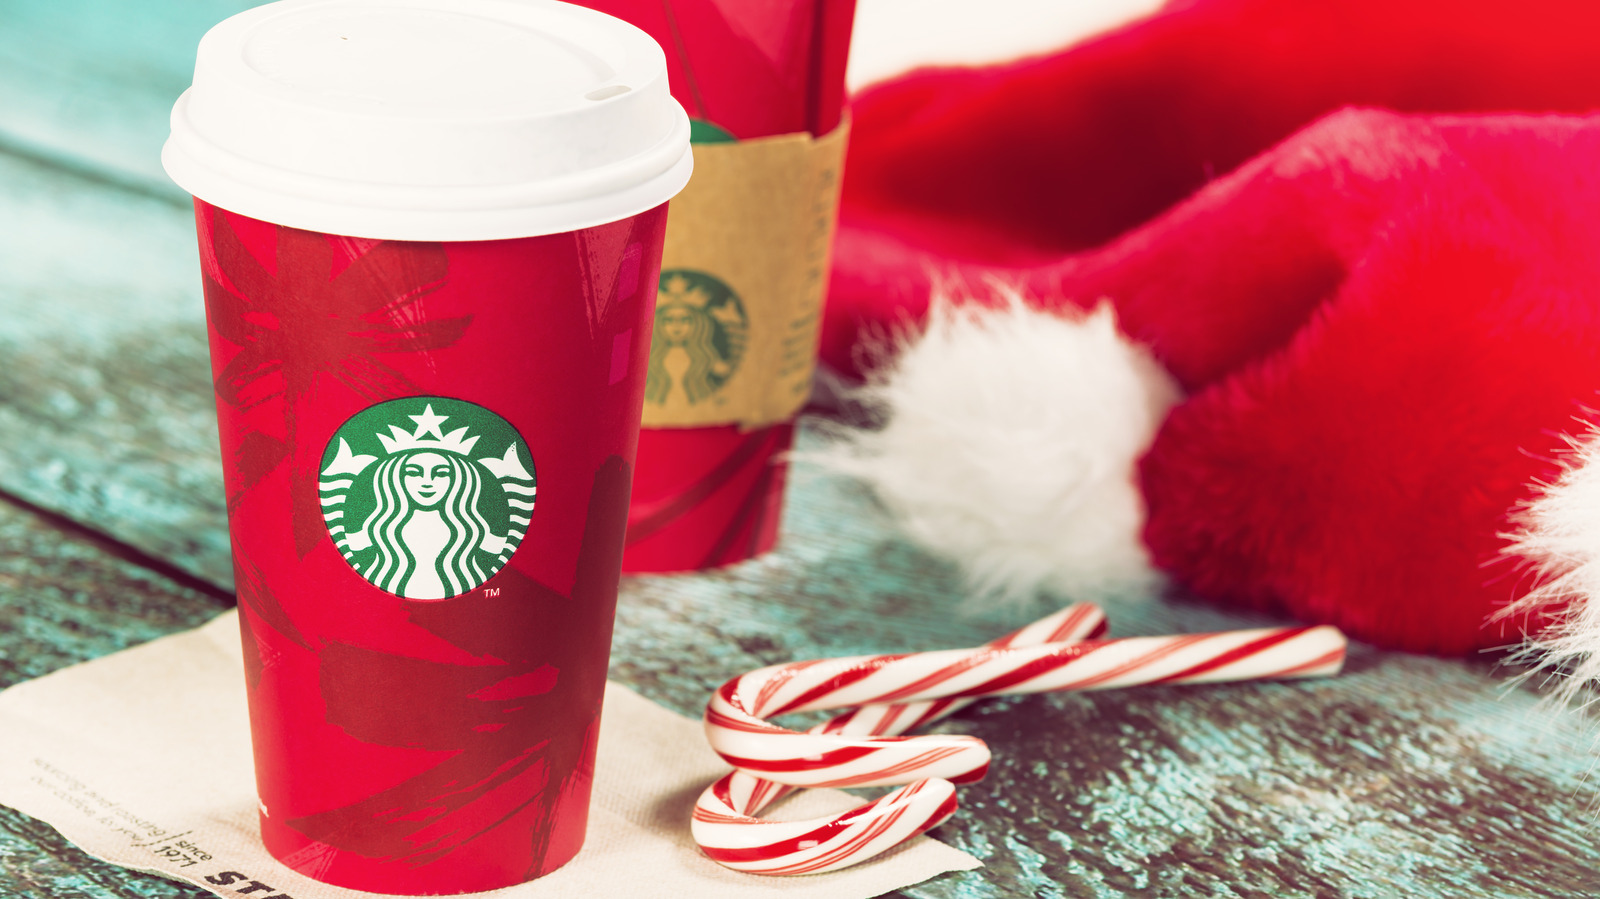 https://www.foodrepublic.com/img/gallery/is-starbucks-open-on-christmas-eve-and-christmas-day-2023/l-intro-1699975707.jpg